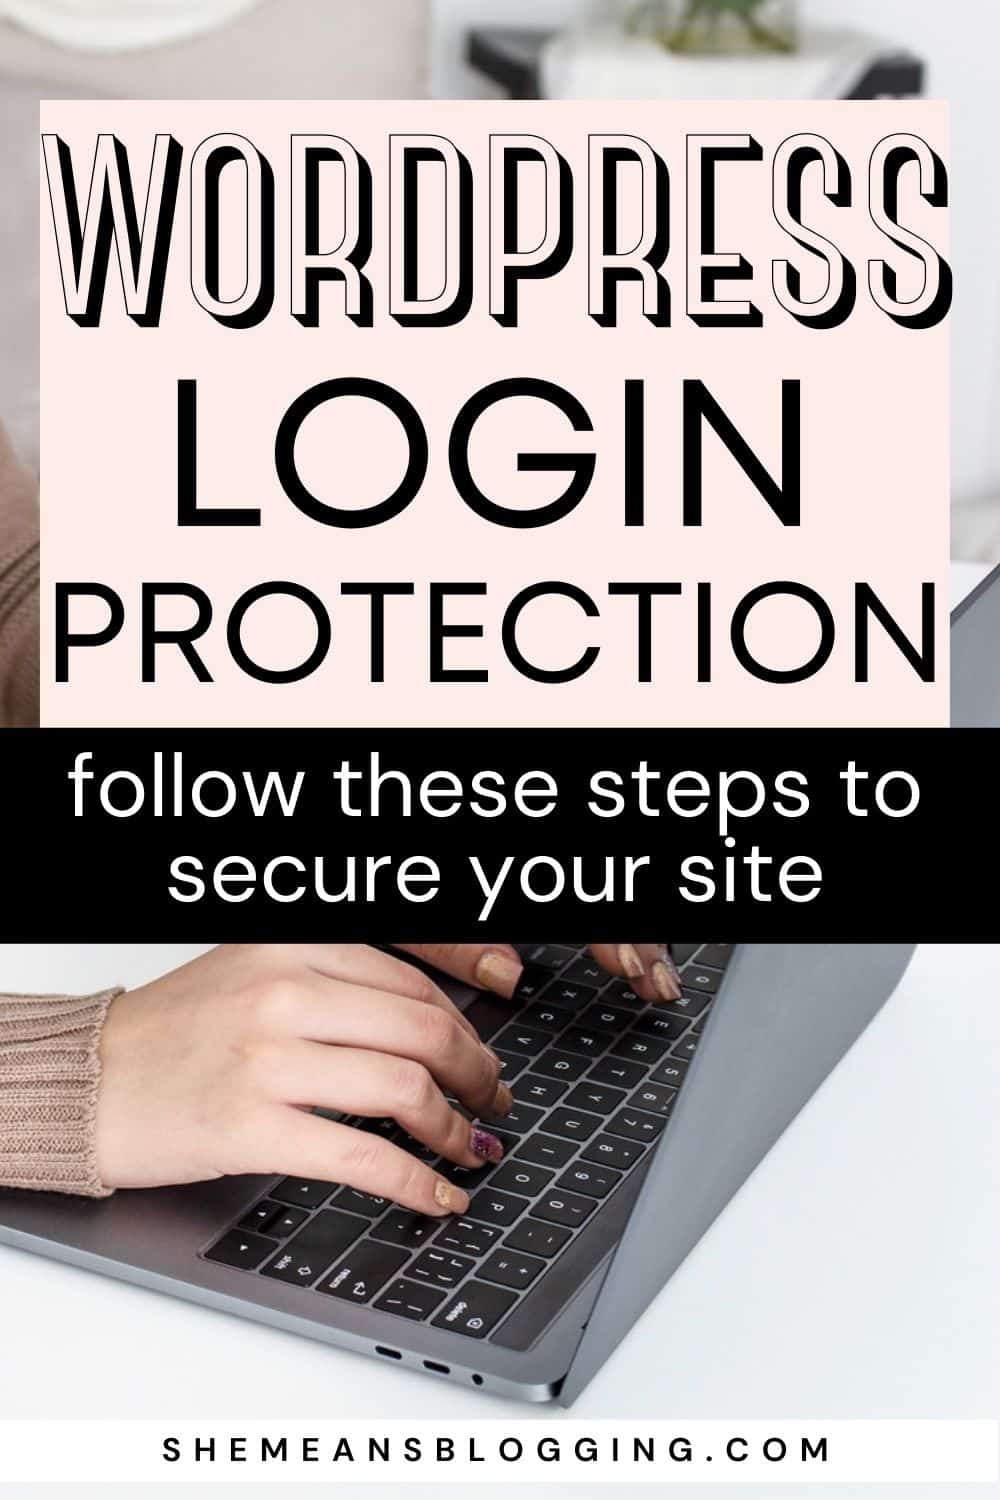 Wordpress login protection: How to secure your site? Follow these important steps to protect your wordpress website from brute attacks. Protect wordpress login with these important steps. Don't risk your wordpress site. Click to follow steps.